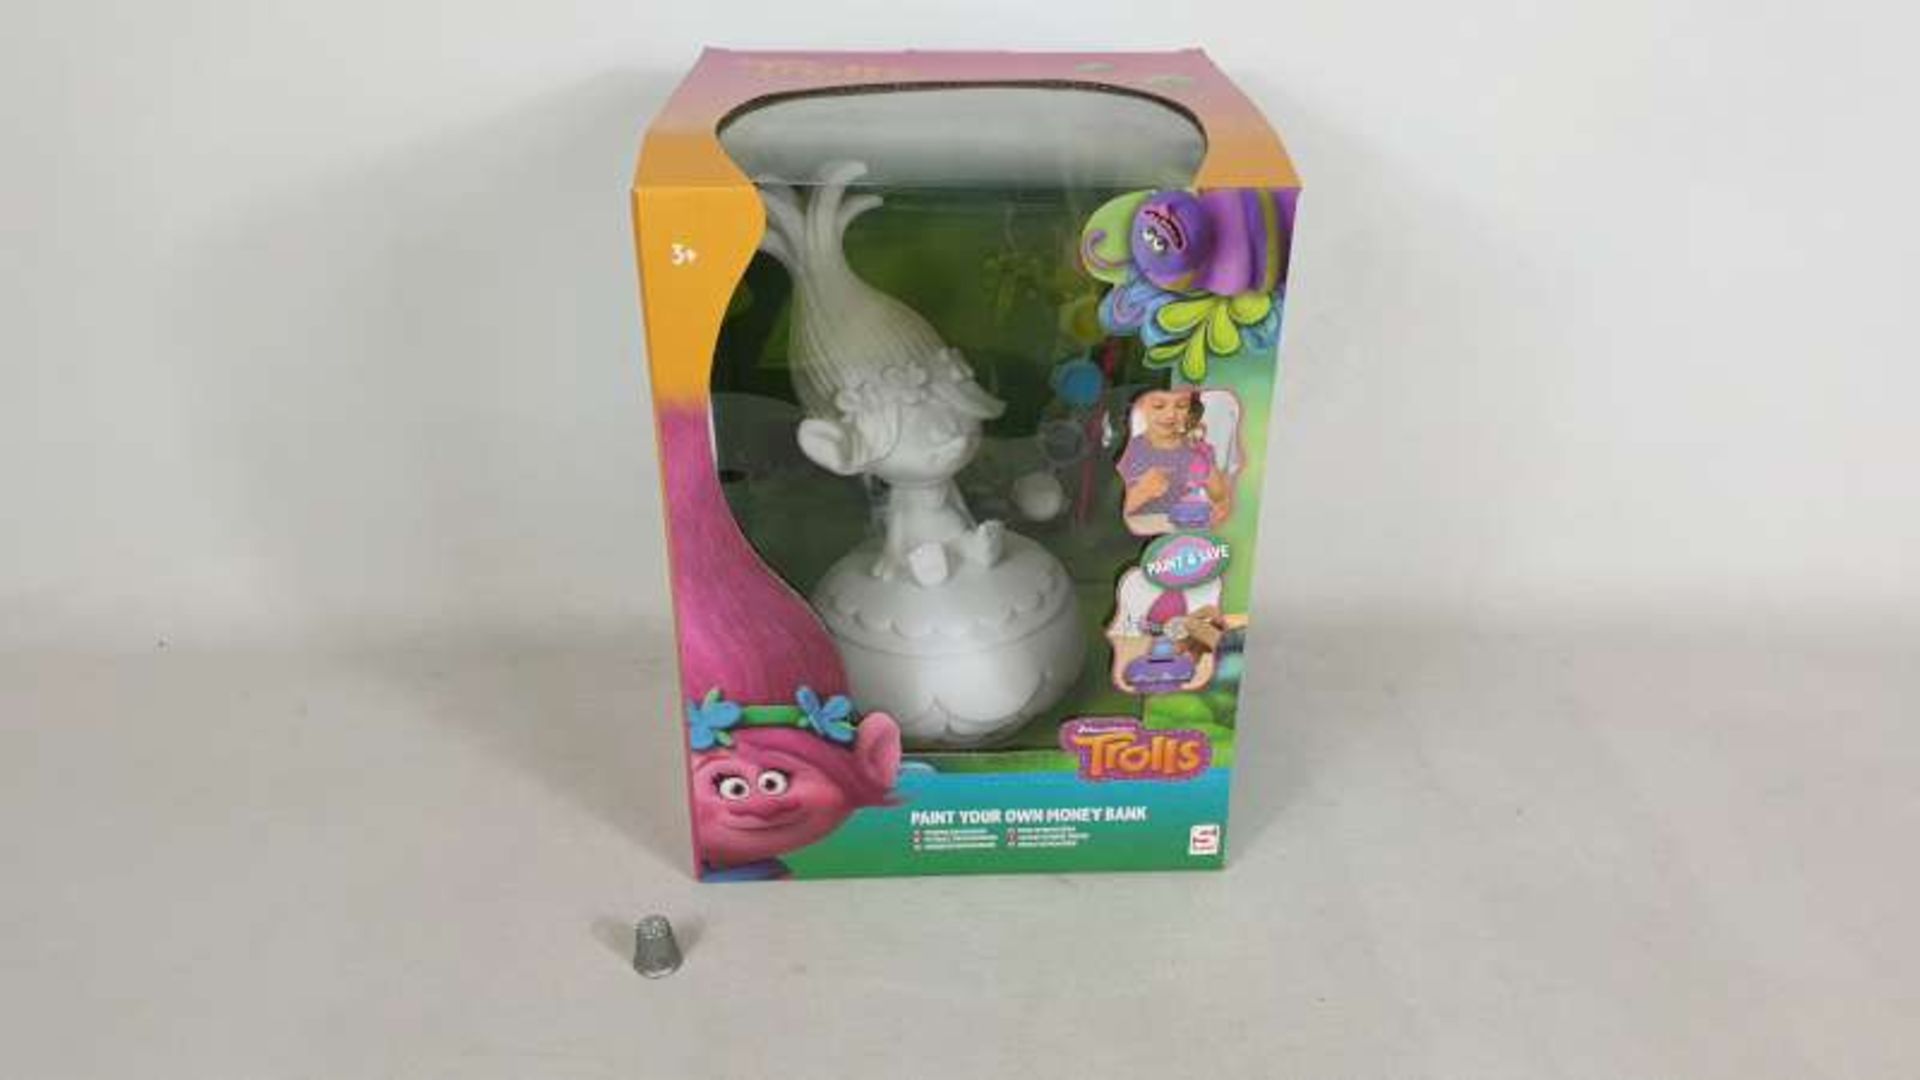 30 X BRAND NEW BOXED DREAMWORKS TROLLS PAINT YOUR OWN MONEY BANKS IN 15 BOXES